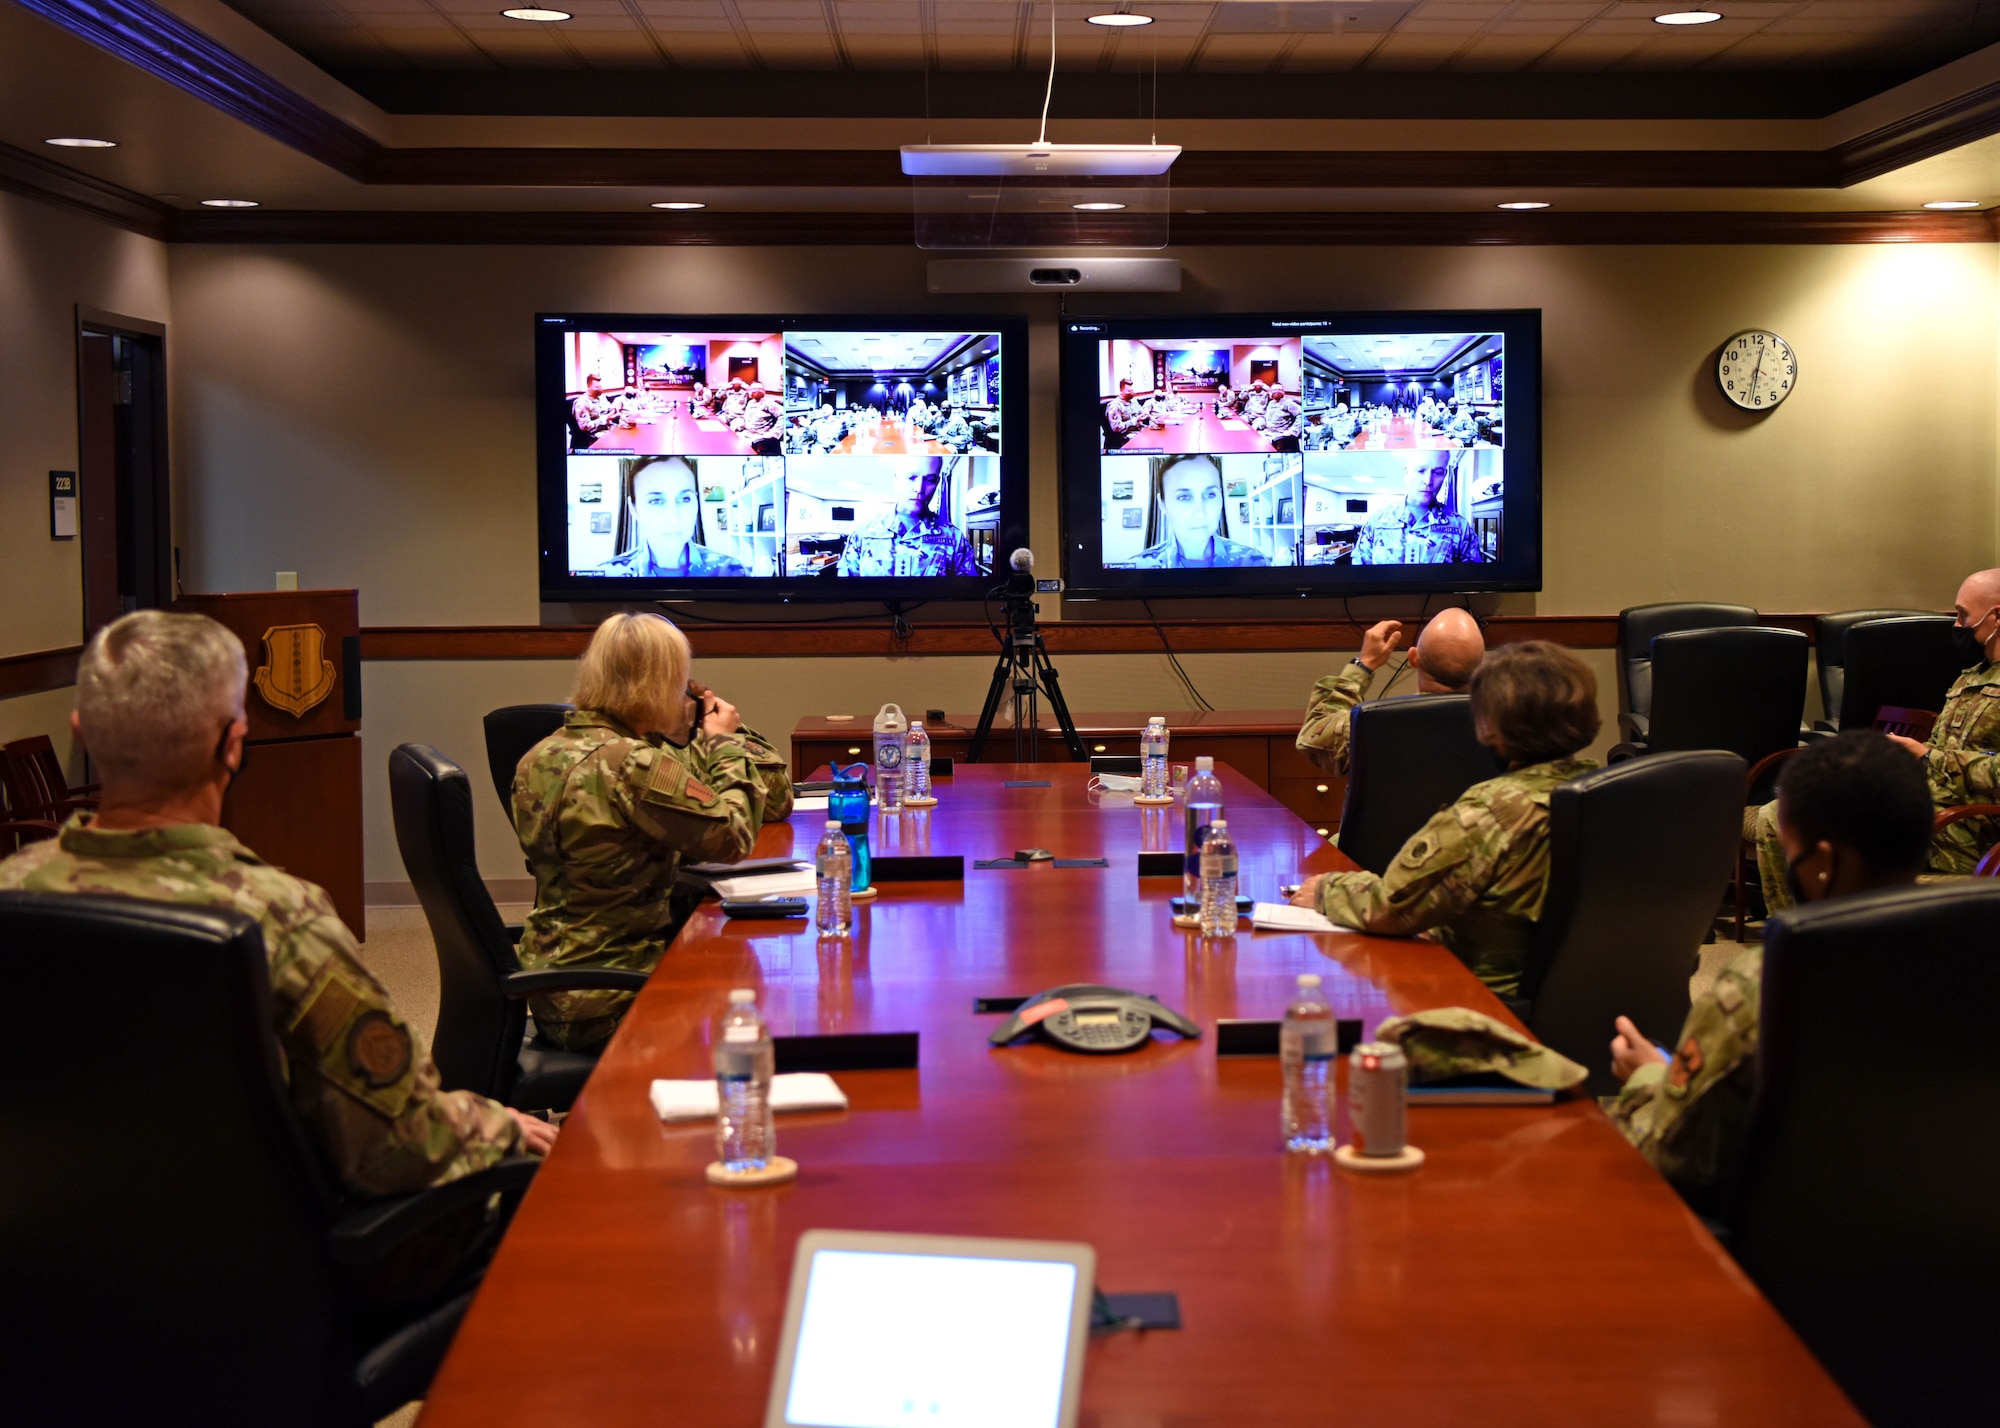 The 17th Training Wing leadership joins a Zoom call with 16 Air Force leadership as part of a virtual visit to the 17th TRW on Goodfellow Air Force Base, Texas, Aug. 17, 2020. The purpose of the visit was to highlight how Goodfellow has thrived during COVID-19. (U.S. Air Force photo by Airman 1st Class Ethan Sherwood)